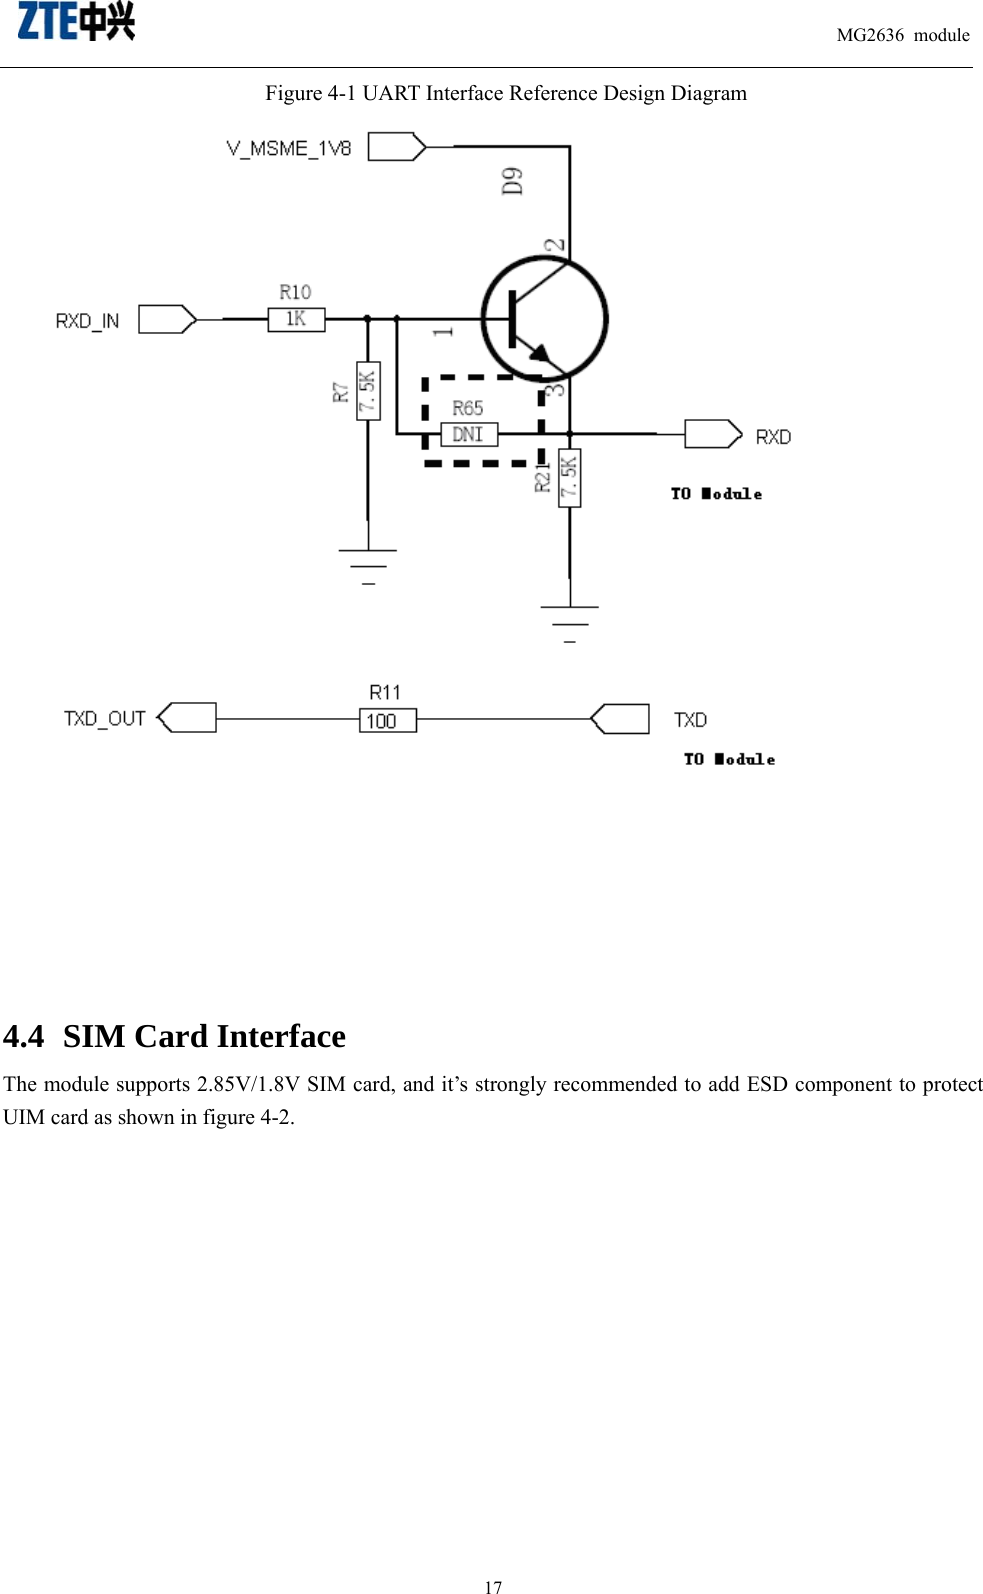                                                                          MG2636 module                                                    17Figure 4-1 UART Interface Reference Design Diagram     4.4 SIM Card Interface The module supports 2.85V/1.8V SIM card, and it’s strongly recommended to add ESD component to protect UIM card as shown in figure 4-2.   